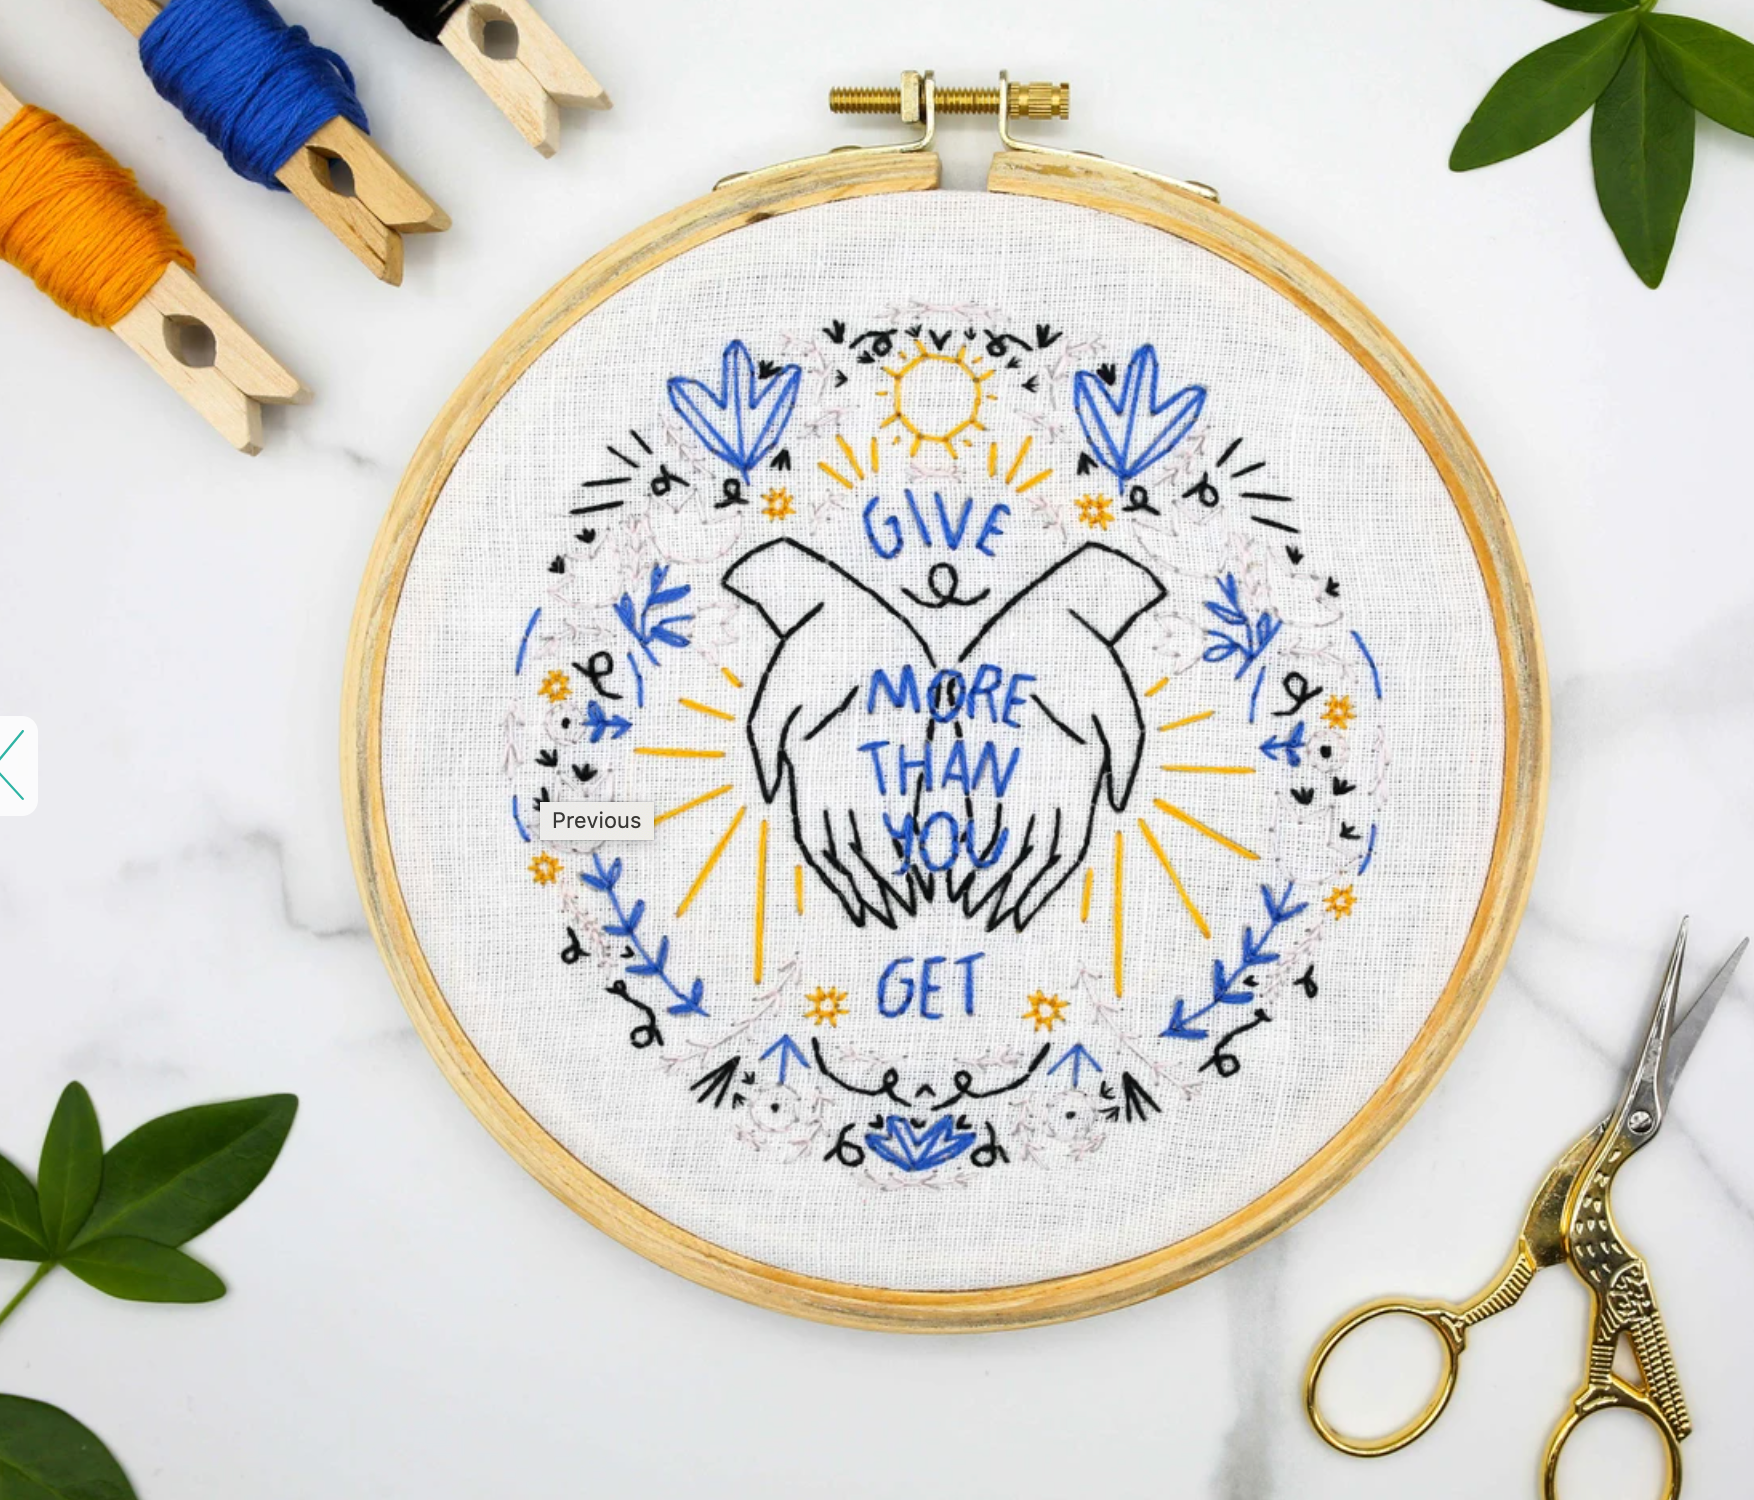 Embroidery Kit - Give More Than You Get